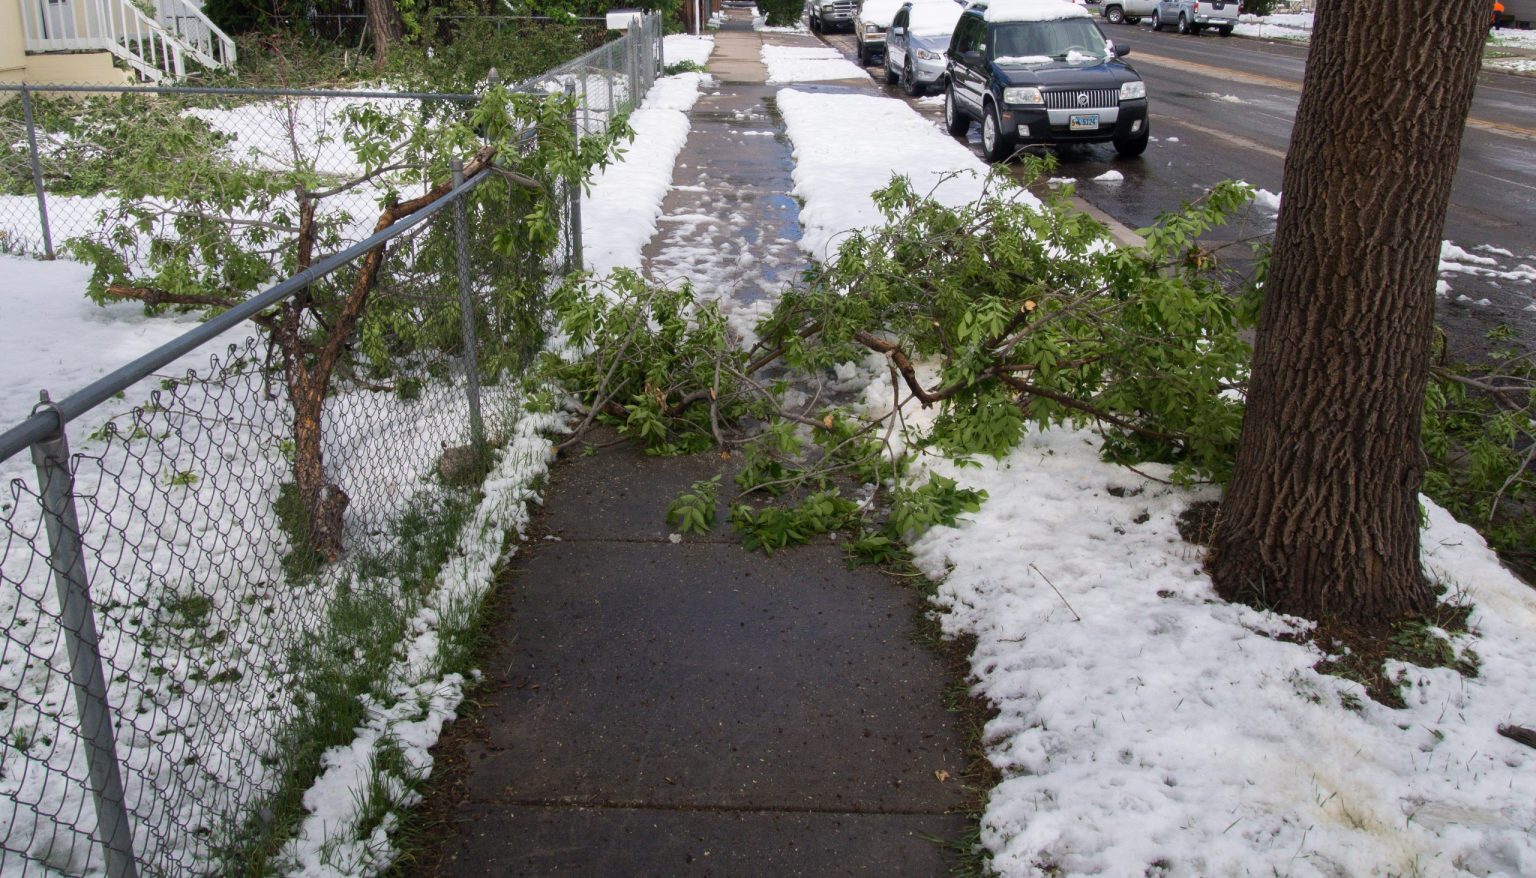 Sidewalks across Laramie were covered in heavy wet snow and large branches from nearby trees after Monday’s snowfall.